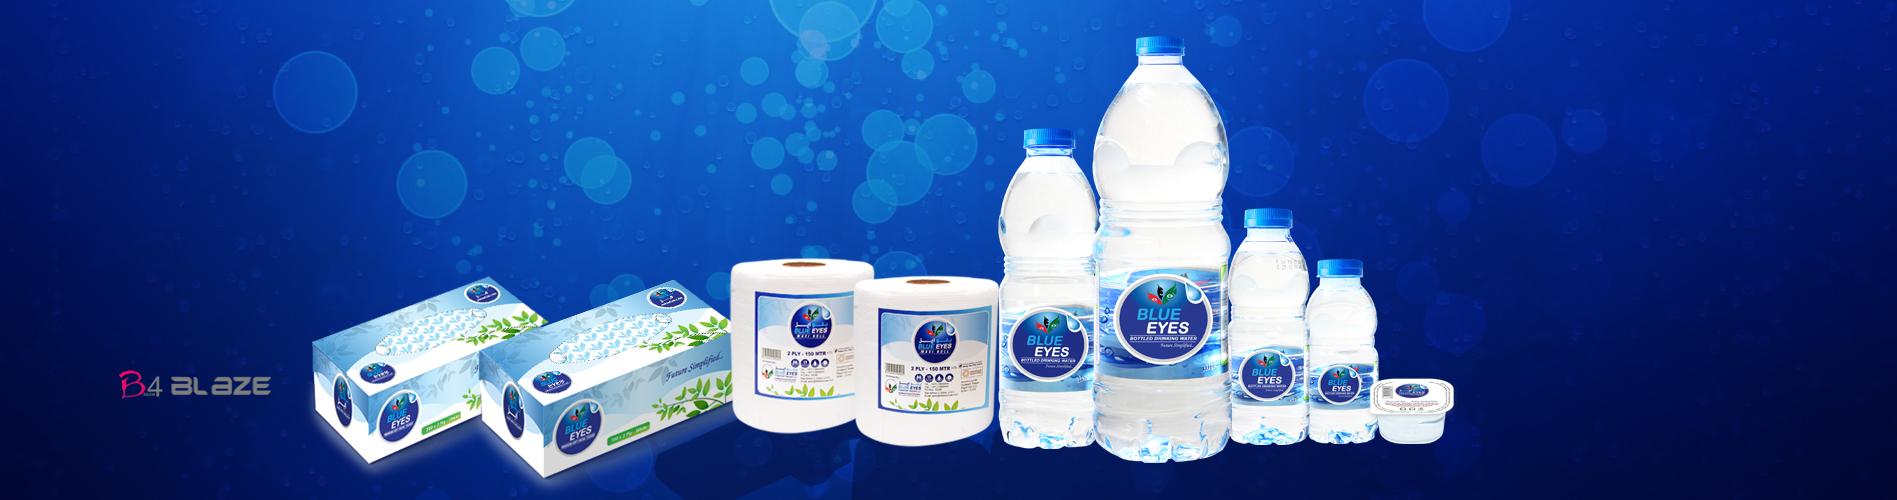 Blue Eyes Water products-banner